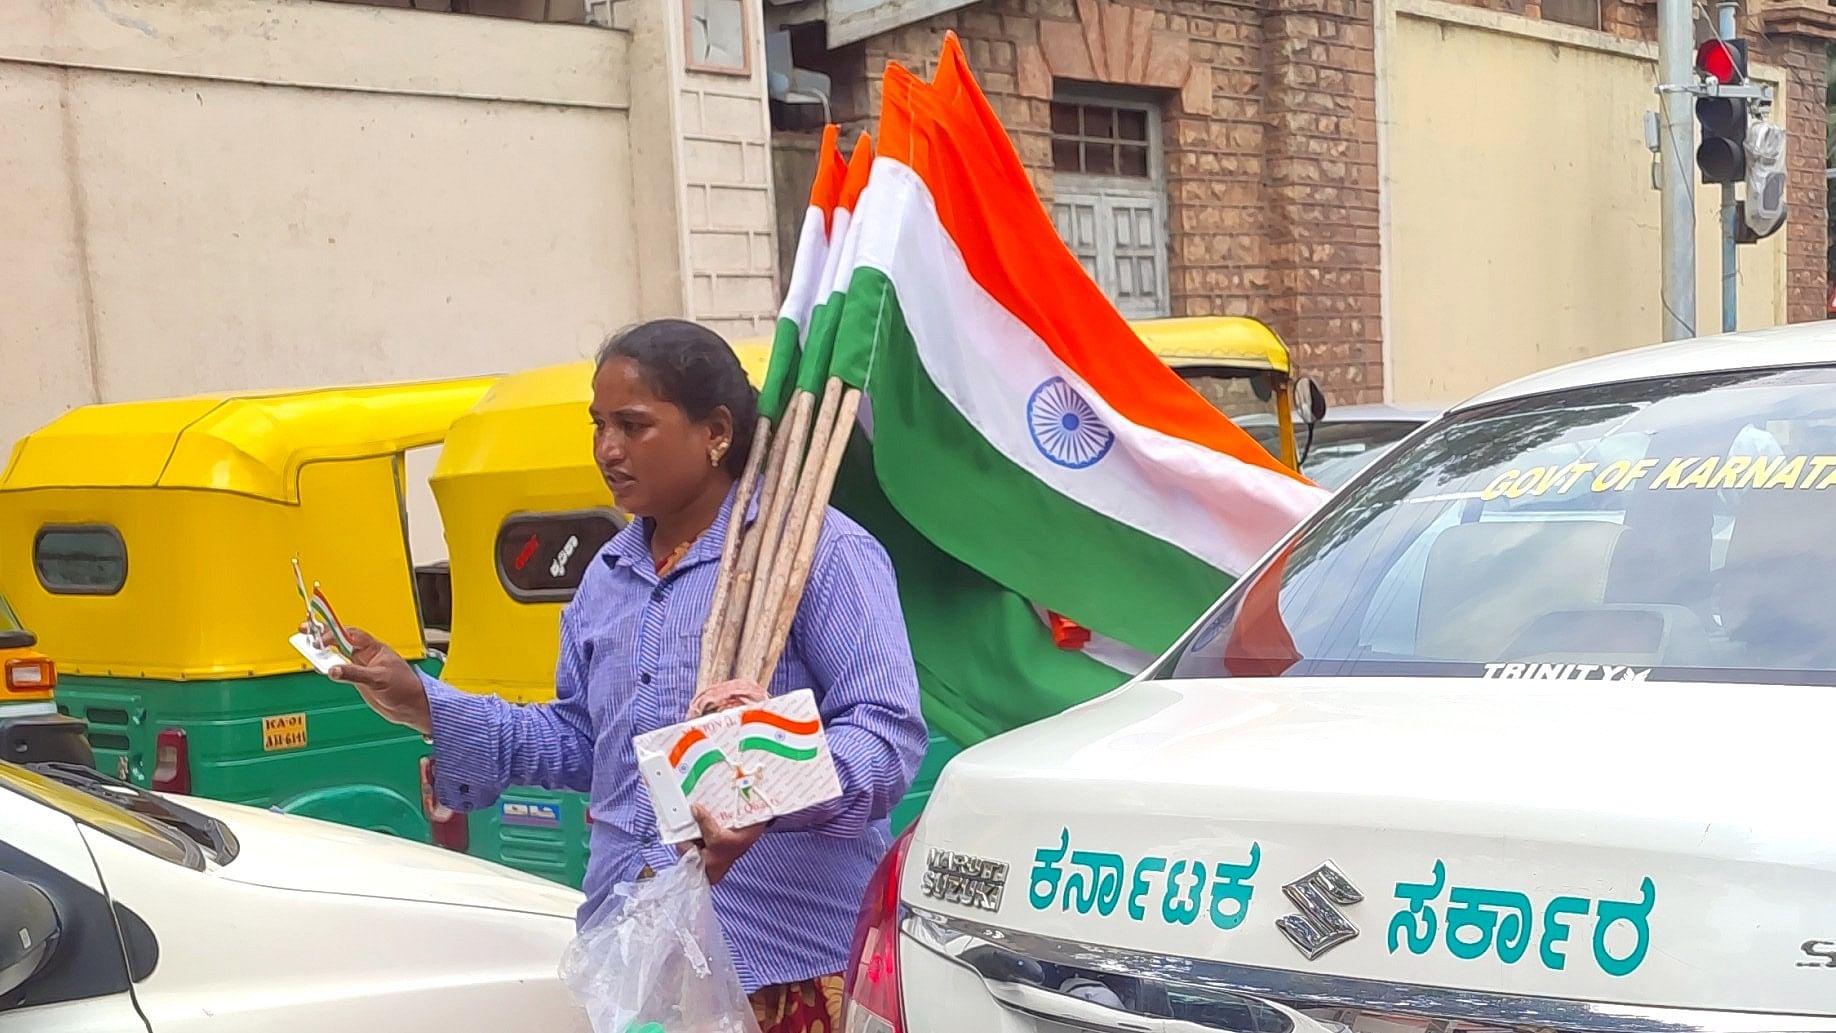 Ahead of Independence Day, a street vendor sells Indian flags at a traffic signal in the city.